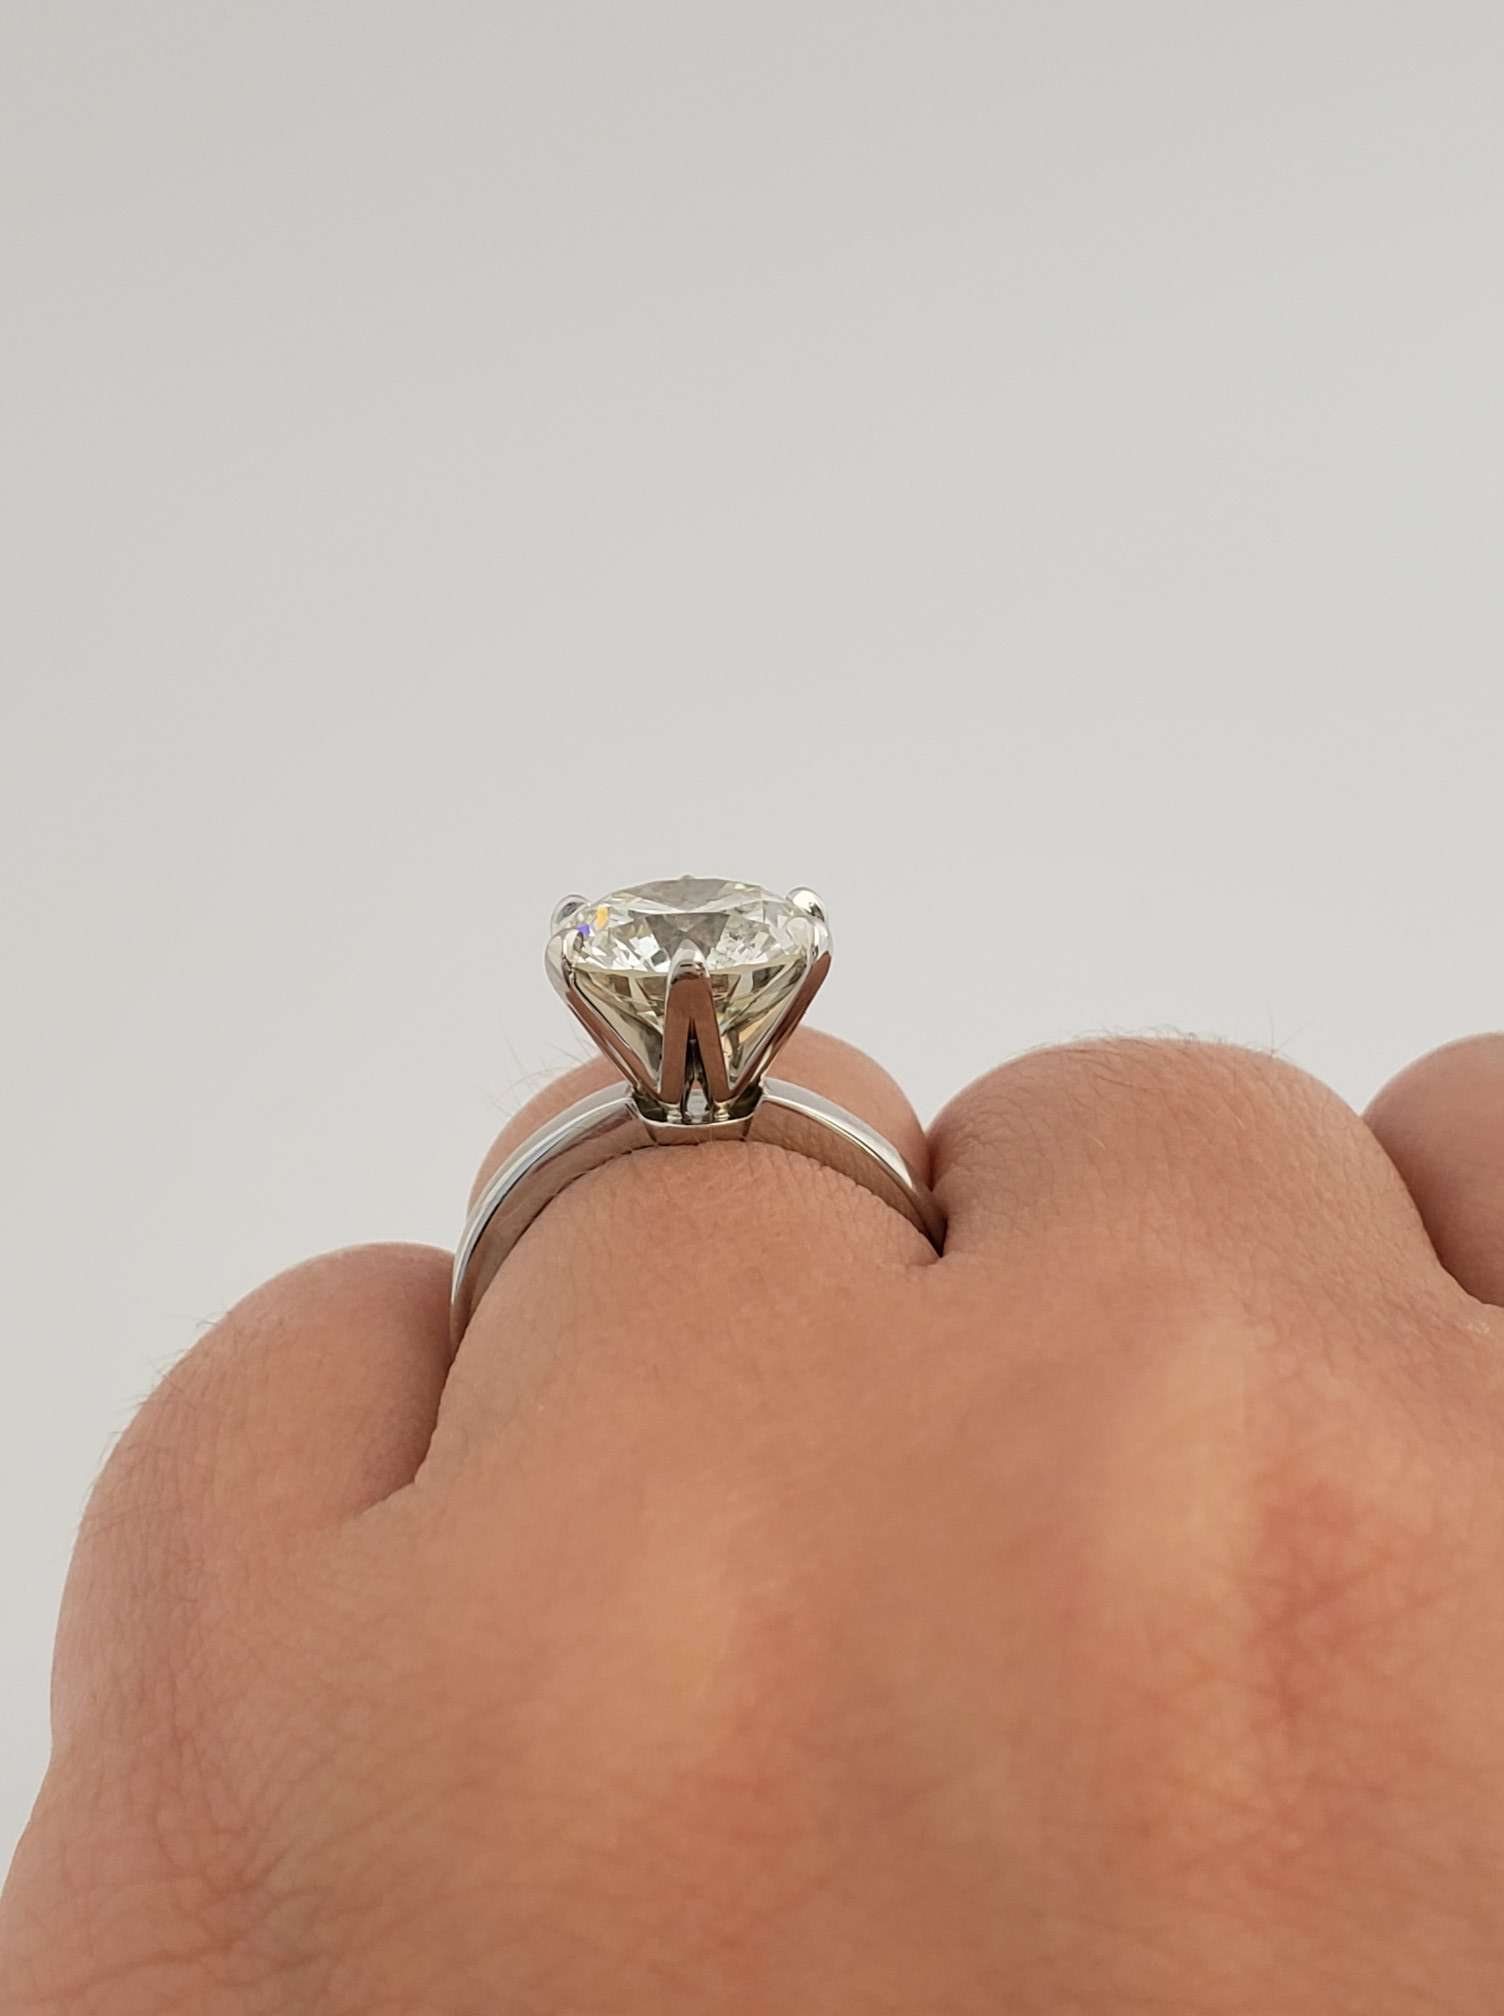 1-2 carat solitaire on size 8 finger?